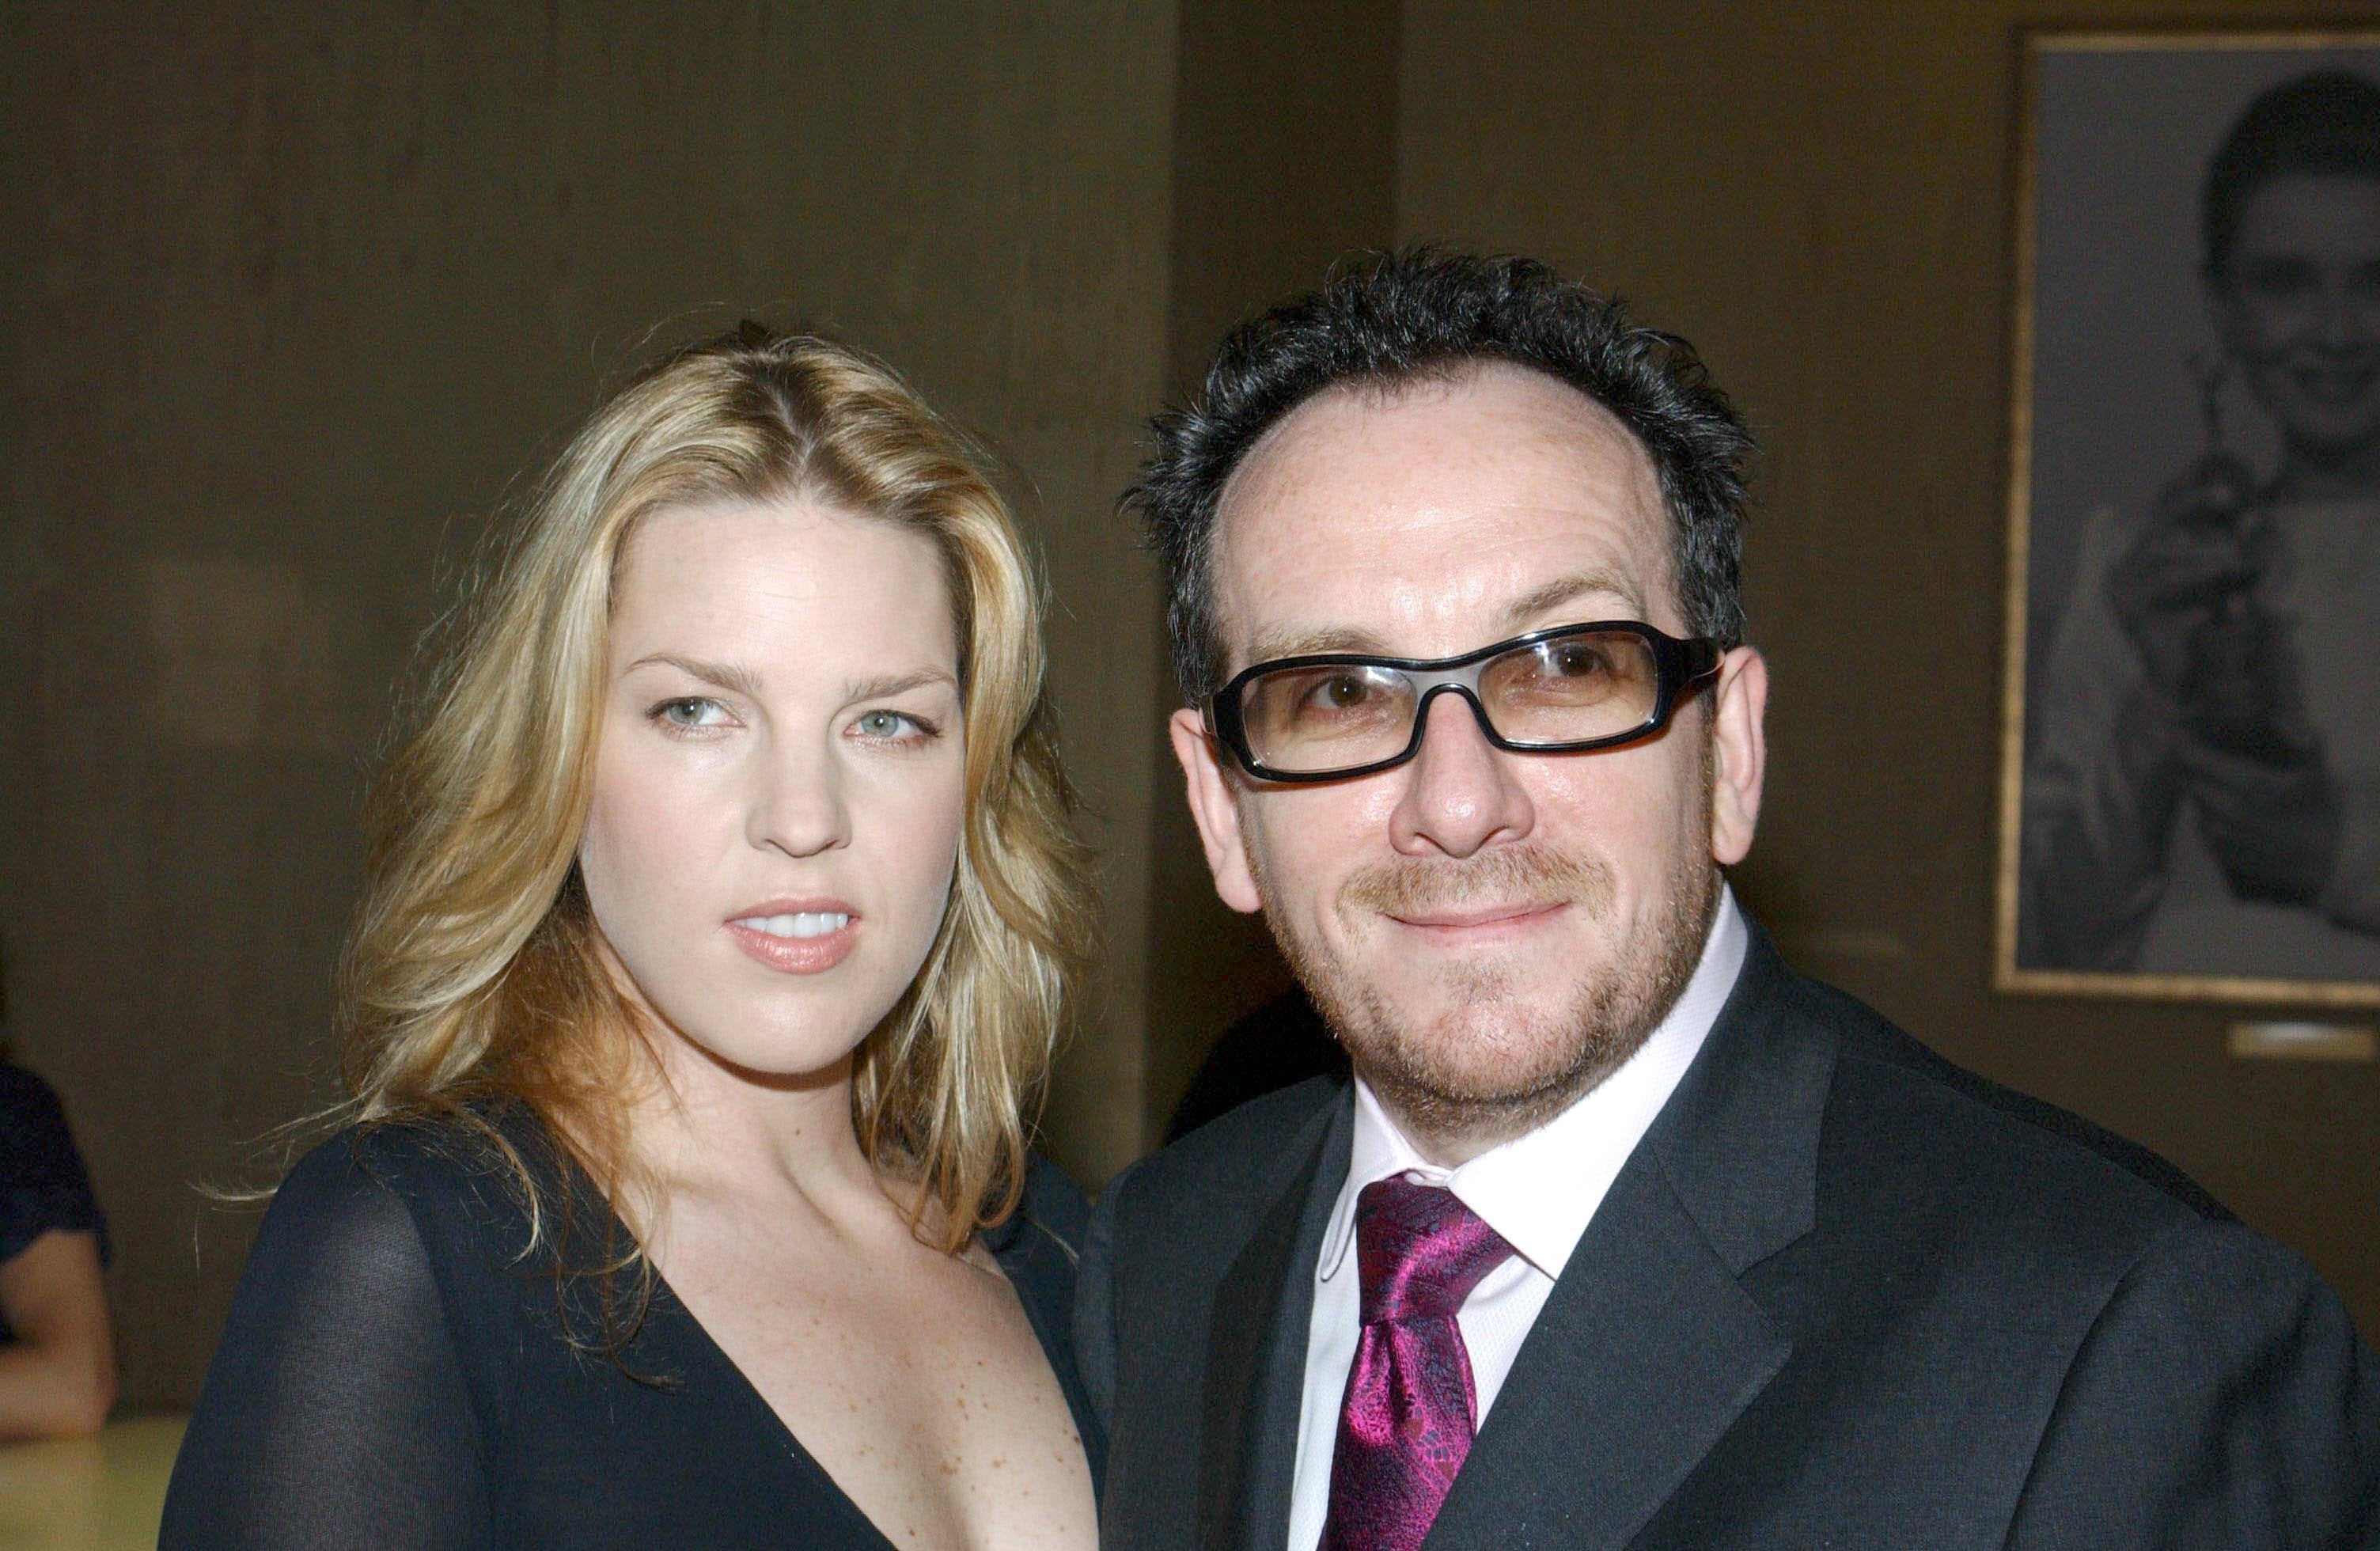 Elvis Costello reflects on meeting wife Diana Krall onstage in front of a billion people The Independent